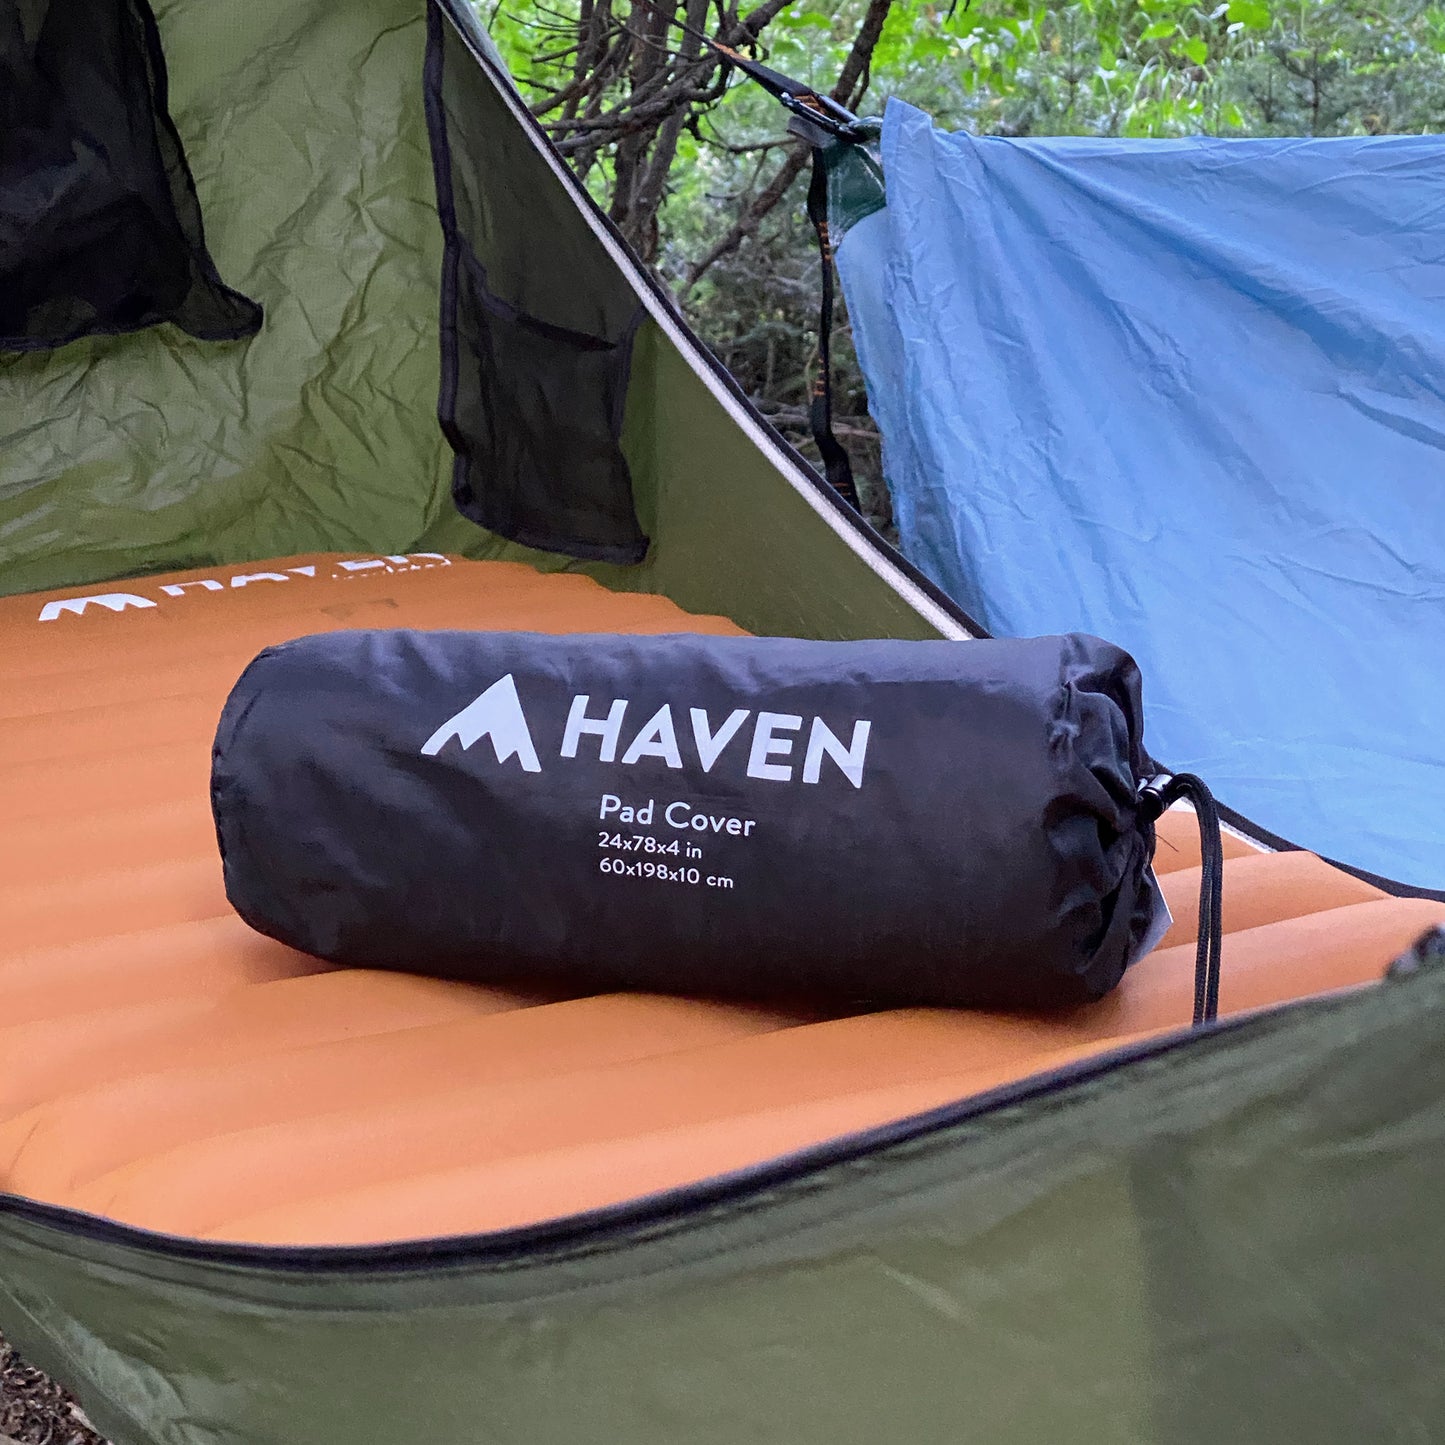 Haven Insulated Pad Cover